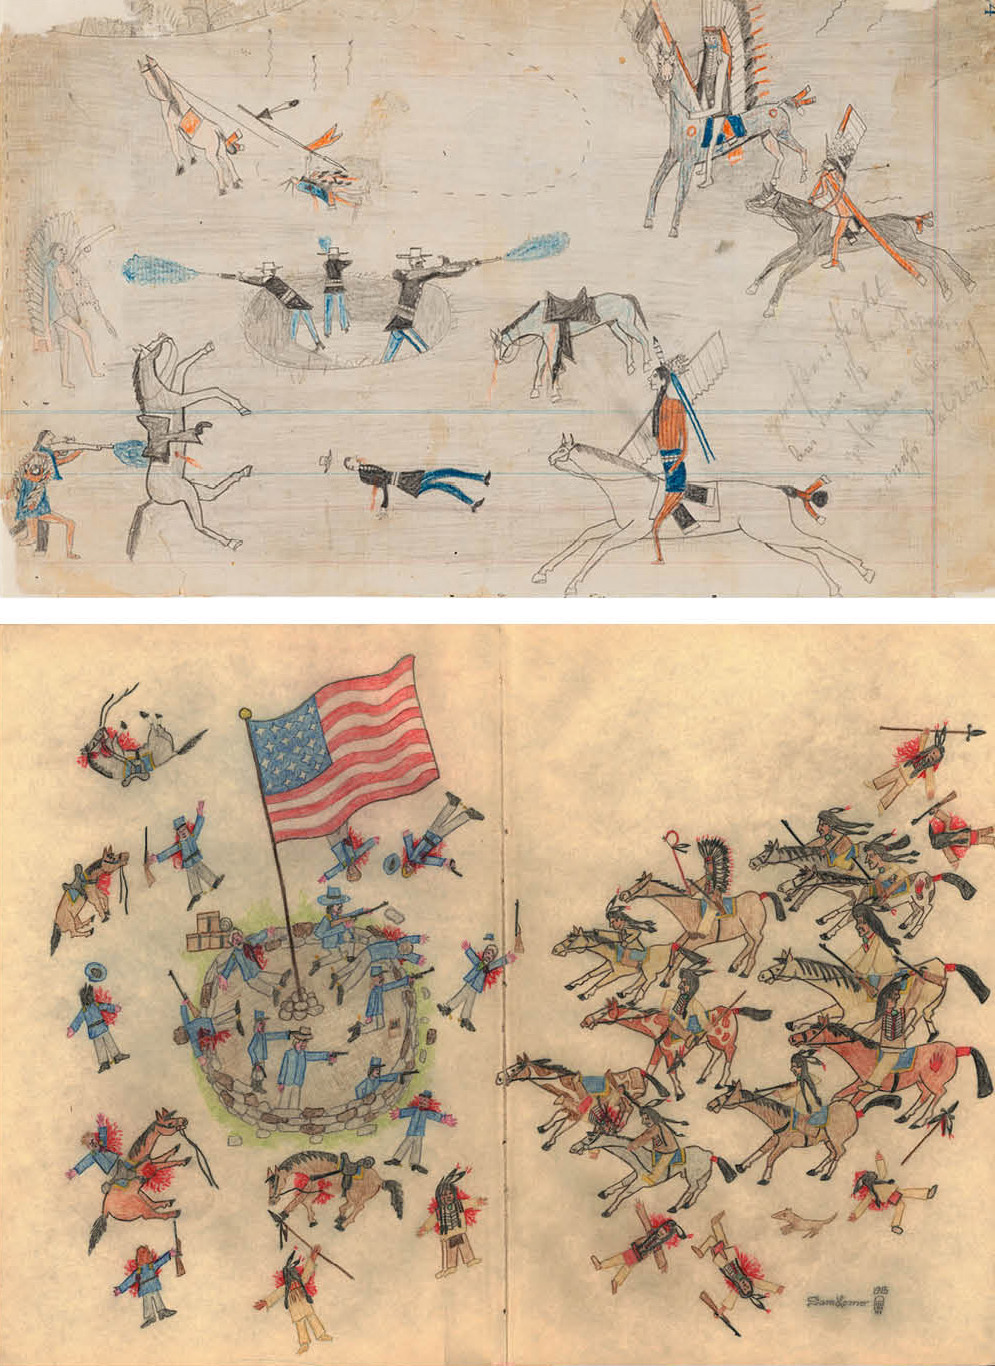 Top Image: "Panoramic view of Indian attack". Housed at the Blanton Museum in Austin, Texas, this drawing comes from the Schild Ledger Book which comprises fifty-six drawings of unknown origin but are believed to be created between 1840 and 1895. The book was purchased by the Texas Memorial Museum in 1964. Bottom Image: “Battle Scene”. Attributed to Sam Lomo, this image was sold to Jim Stewart by Keith Lack and appears in the Lander Pioneer Museum's show "Tribal Warrior Art." Experts say Sam Lomo likely never existed and that the image may have been created in the last decade.